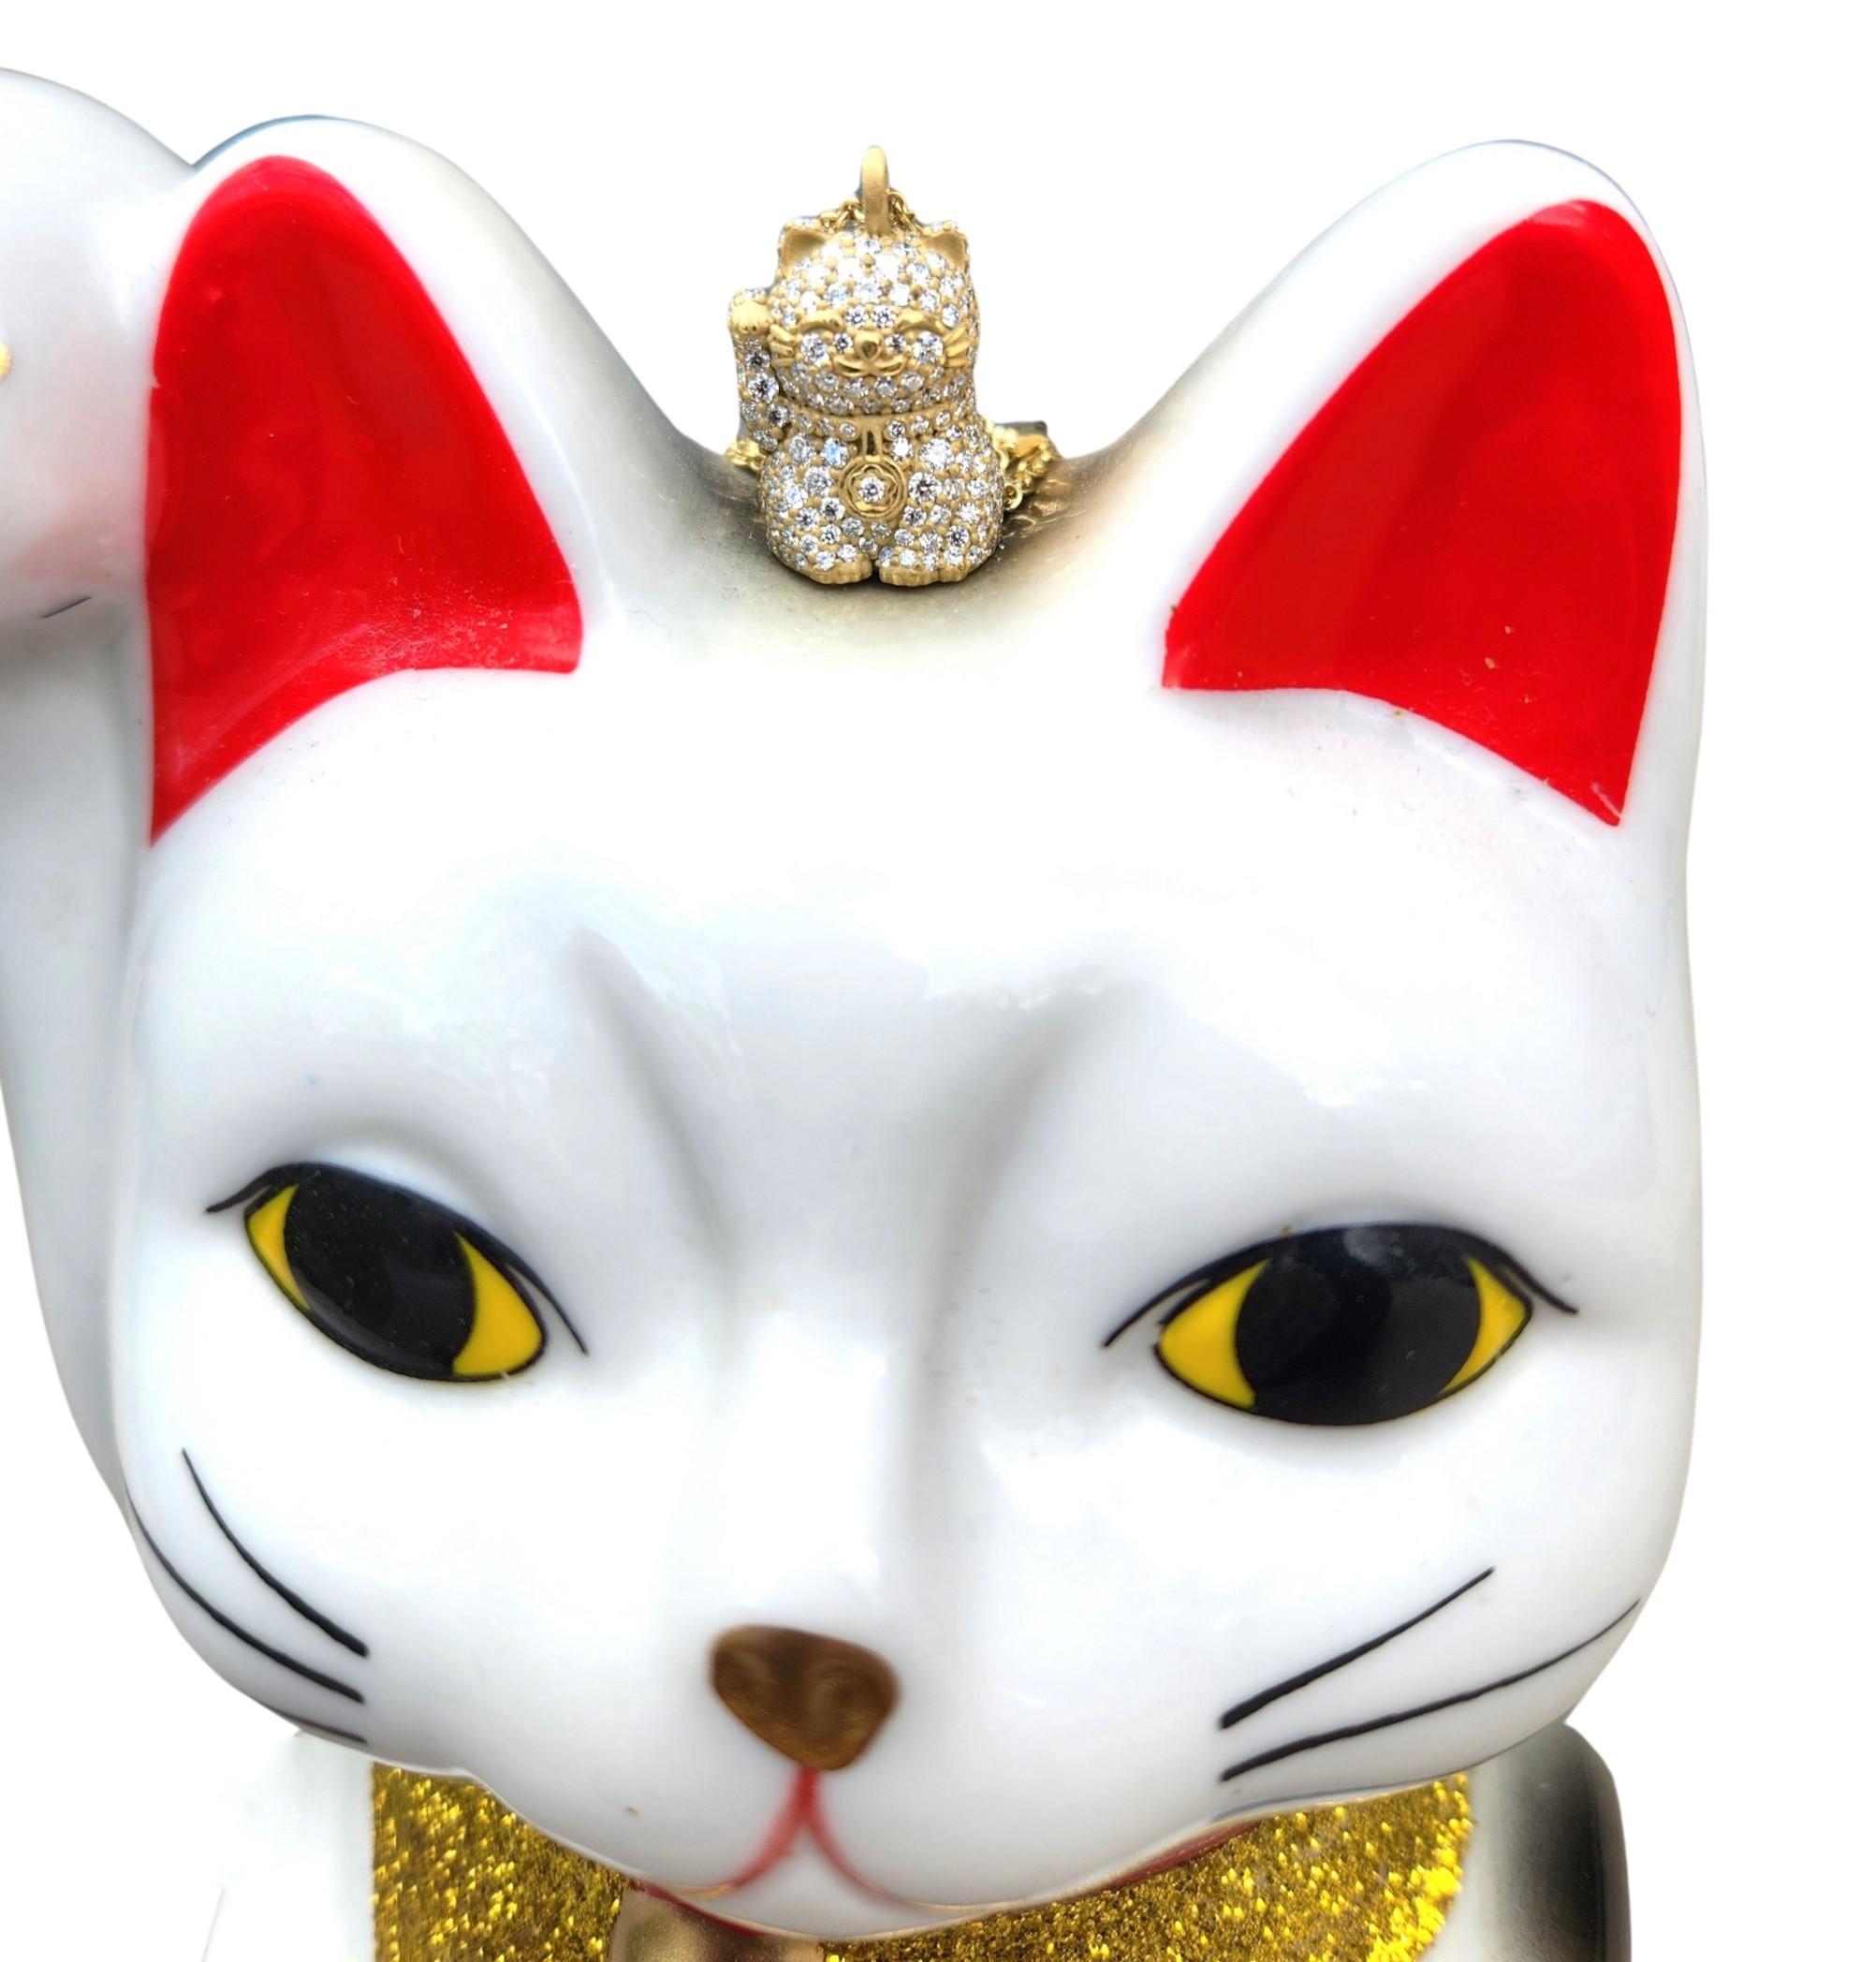 Brilliant Cut Alison Nagasue Gold Blinged out Diamond Hope Cat with Cherry Blossom Necklace For Sale